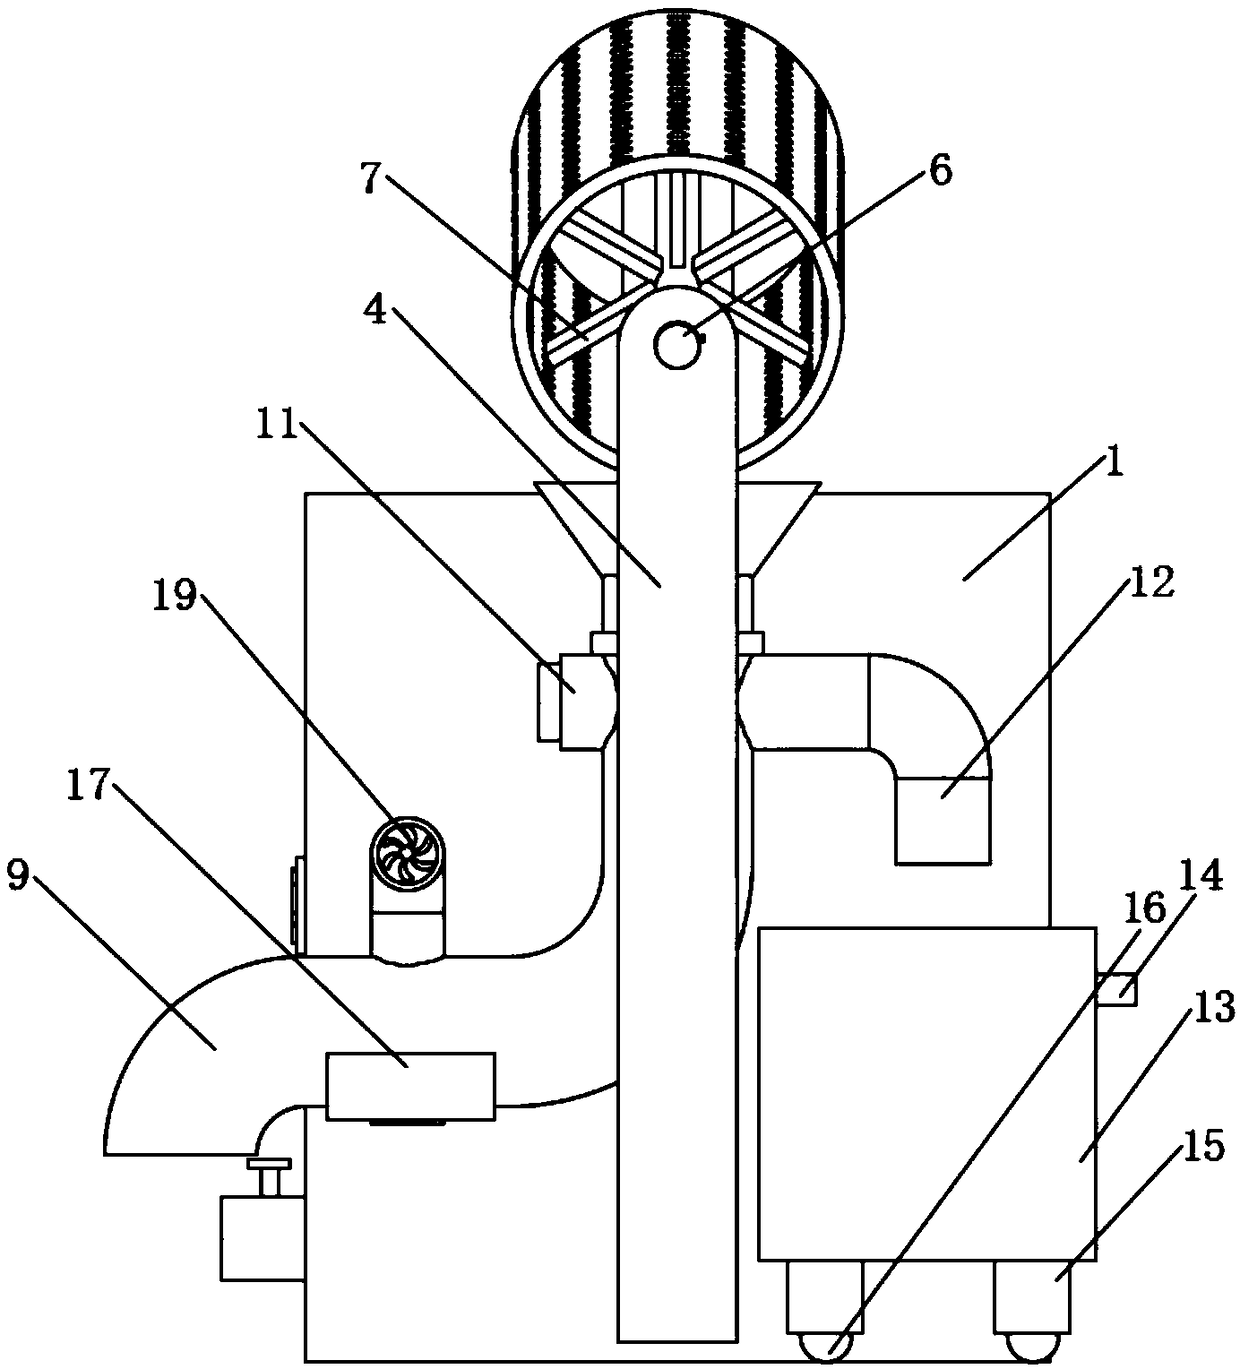 Drainage and material conveying device in soybean soaking system